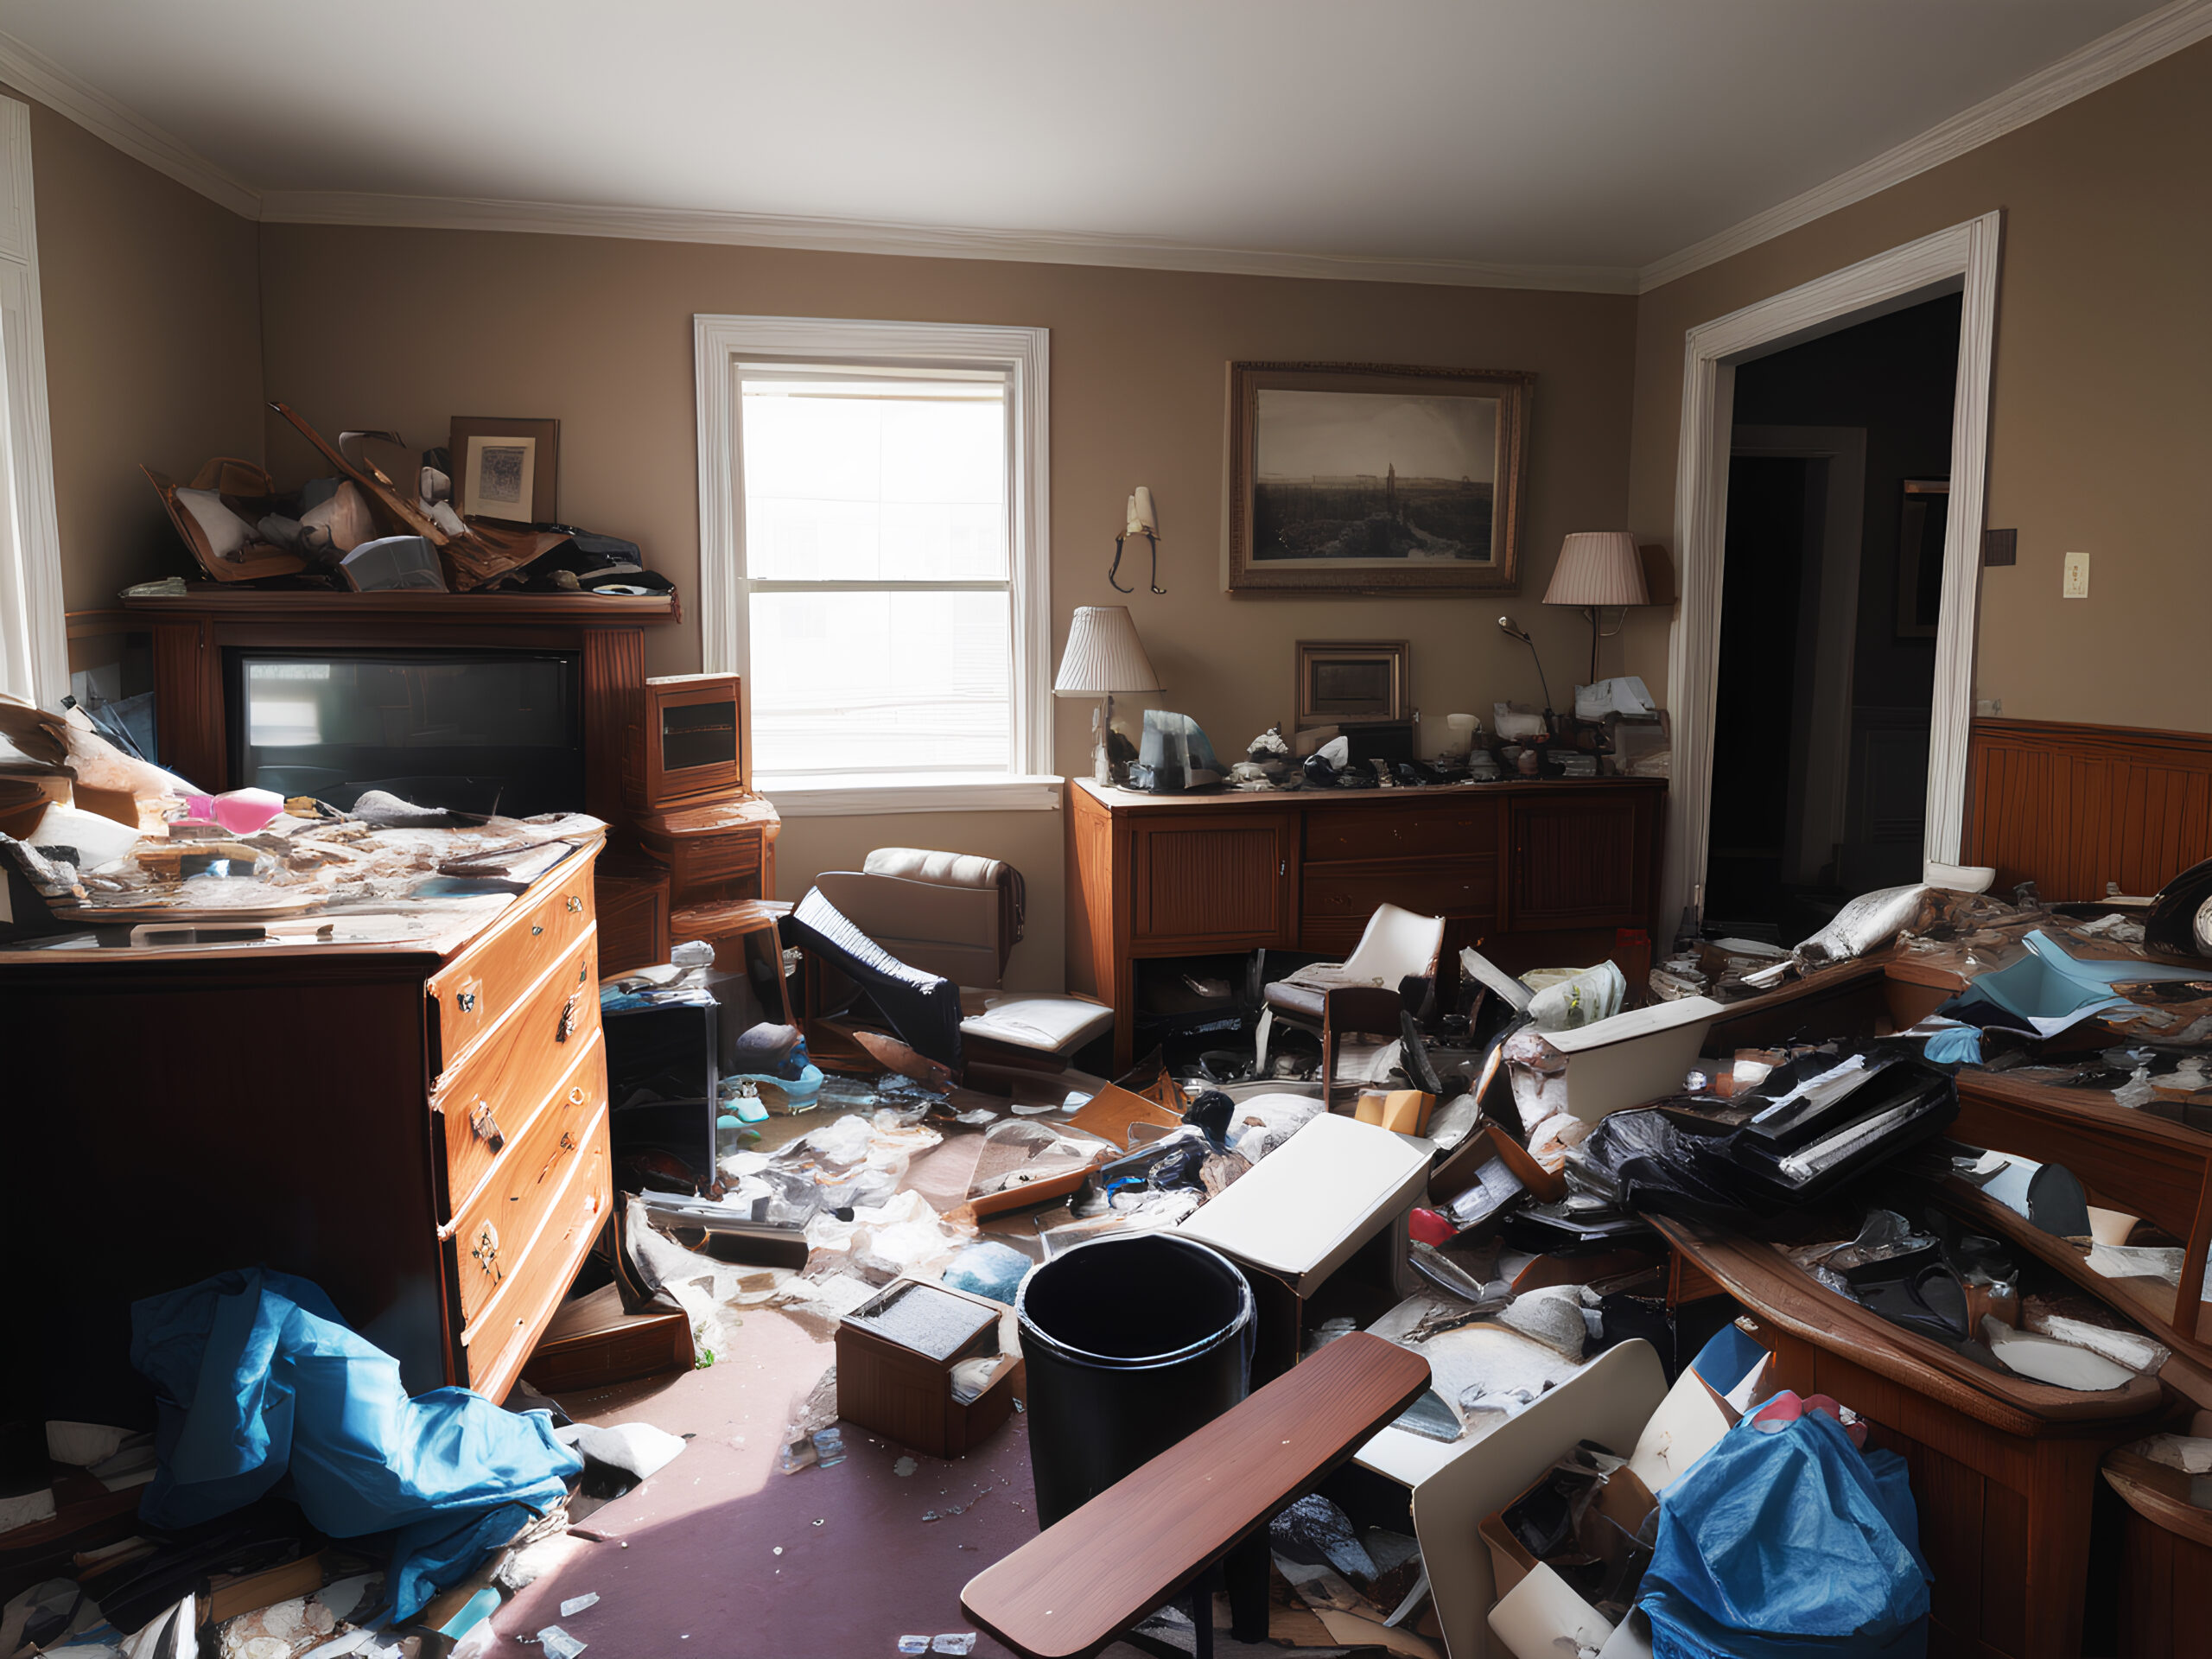 Water Damage Restoration Contractor New York - Water Damaged Personal Property on the Floor of a House